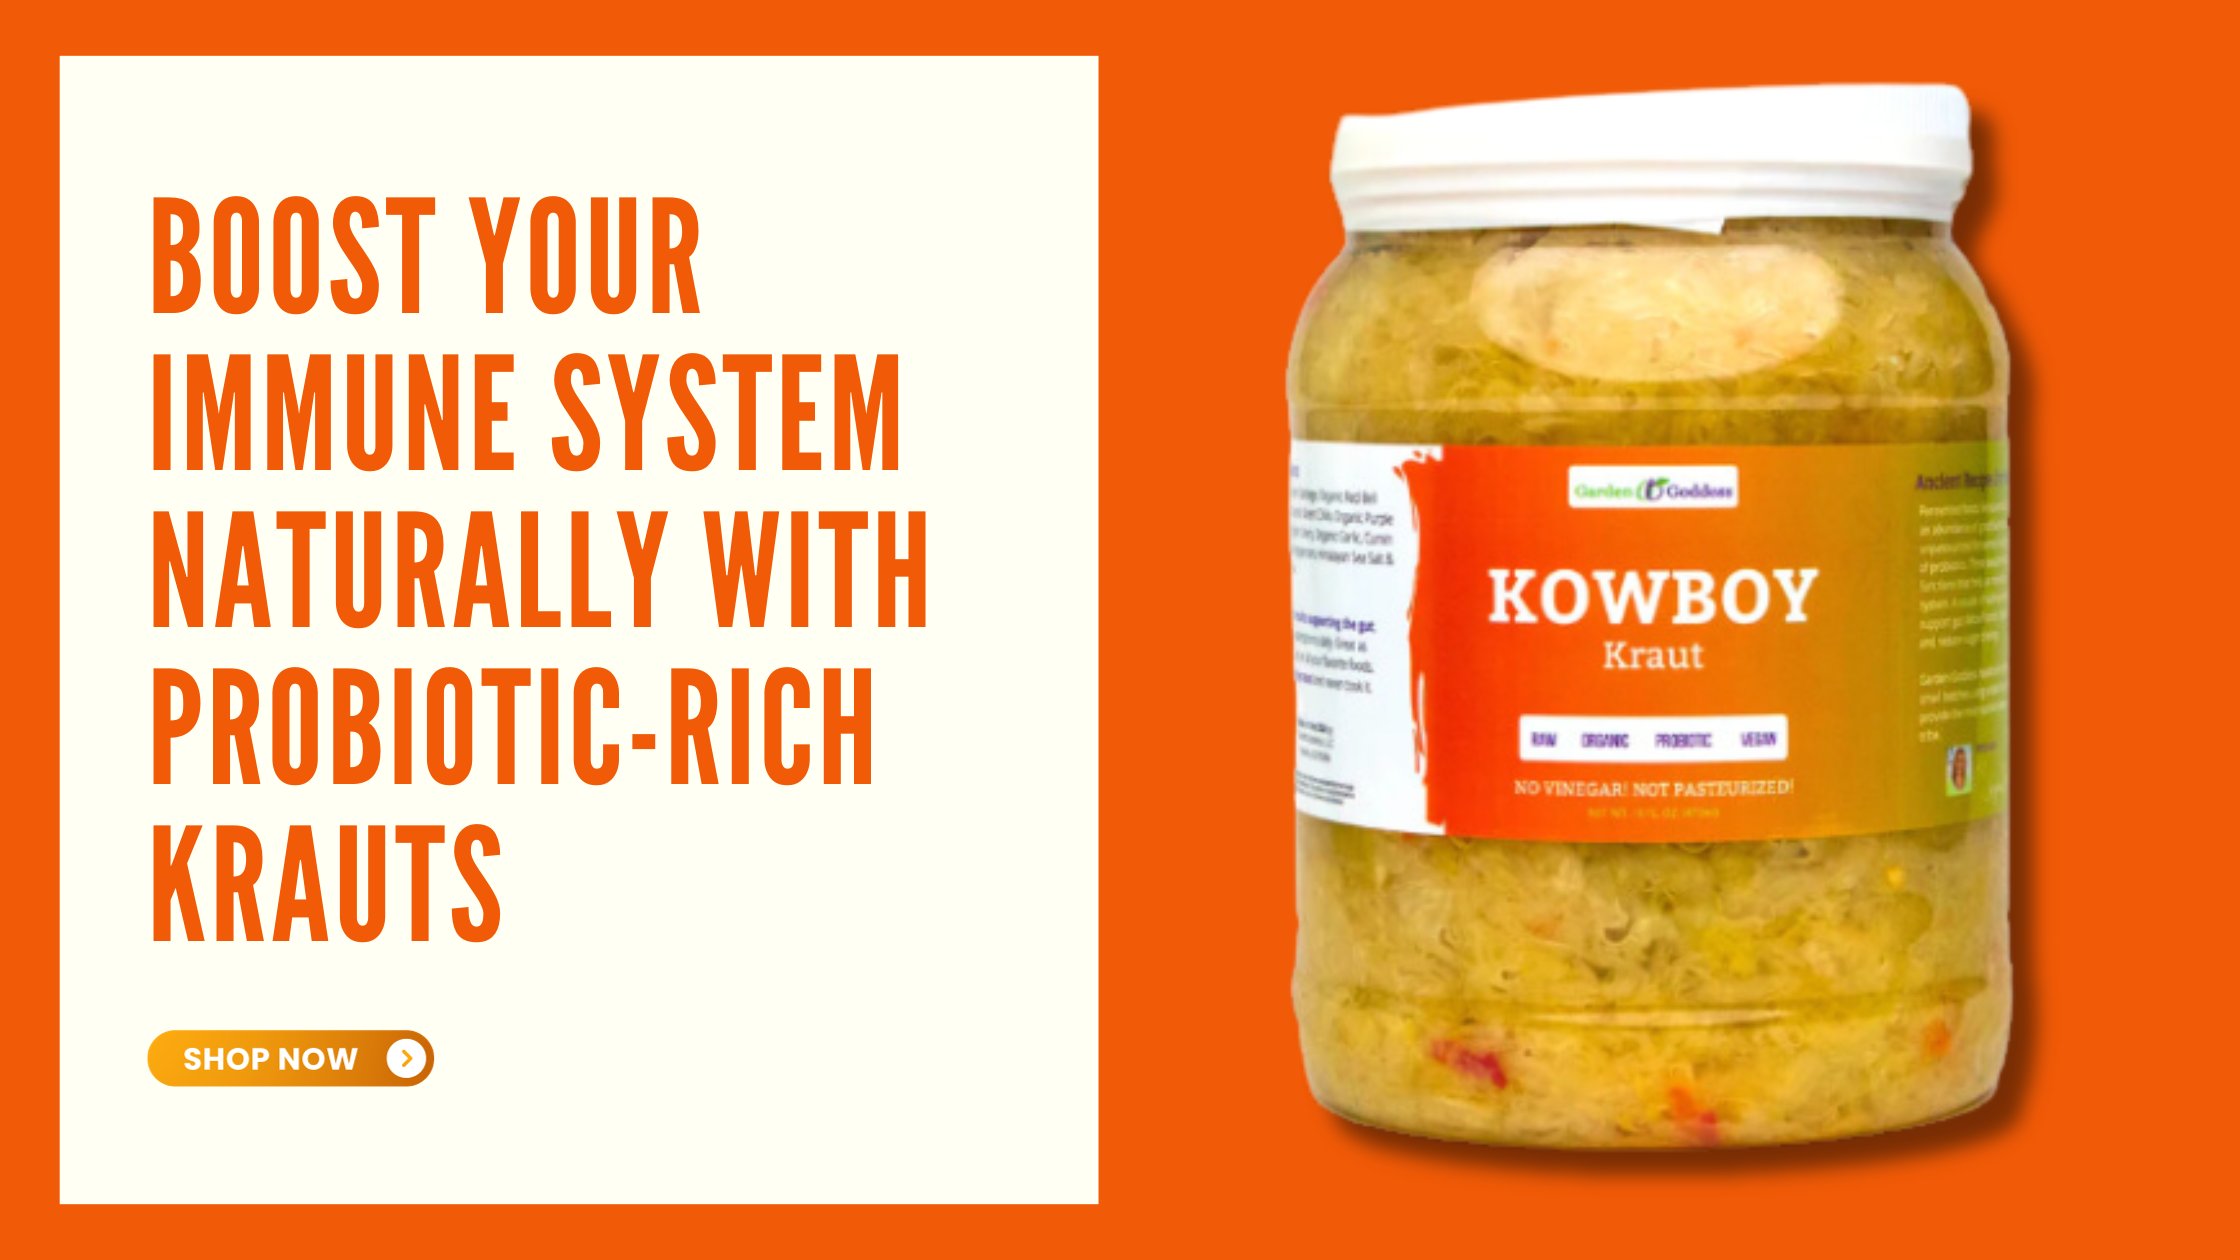 How To Boost Your Immune System Naturally With Probiotic-Rich Krauts?